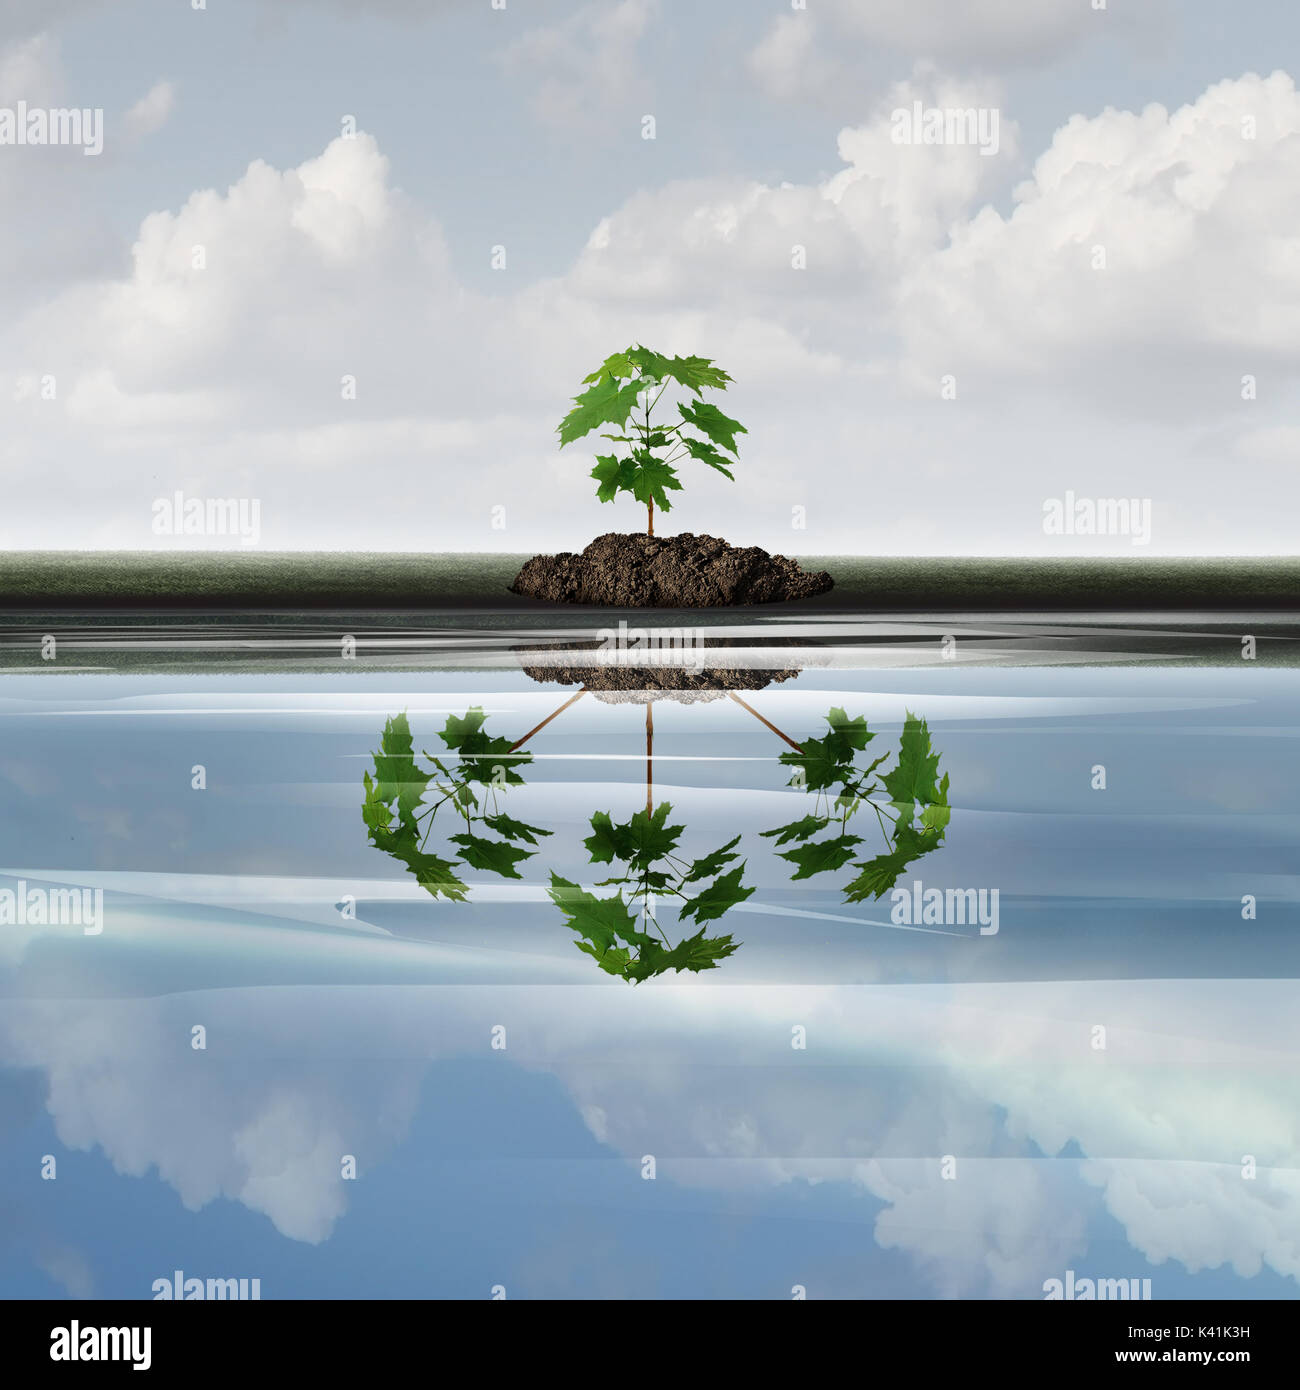 Future growth business concept as a sapling tree with a reflection of multiple plants as a symbol for expansion or growing corporate marketing. Stock Photo